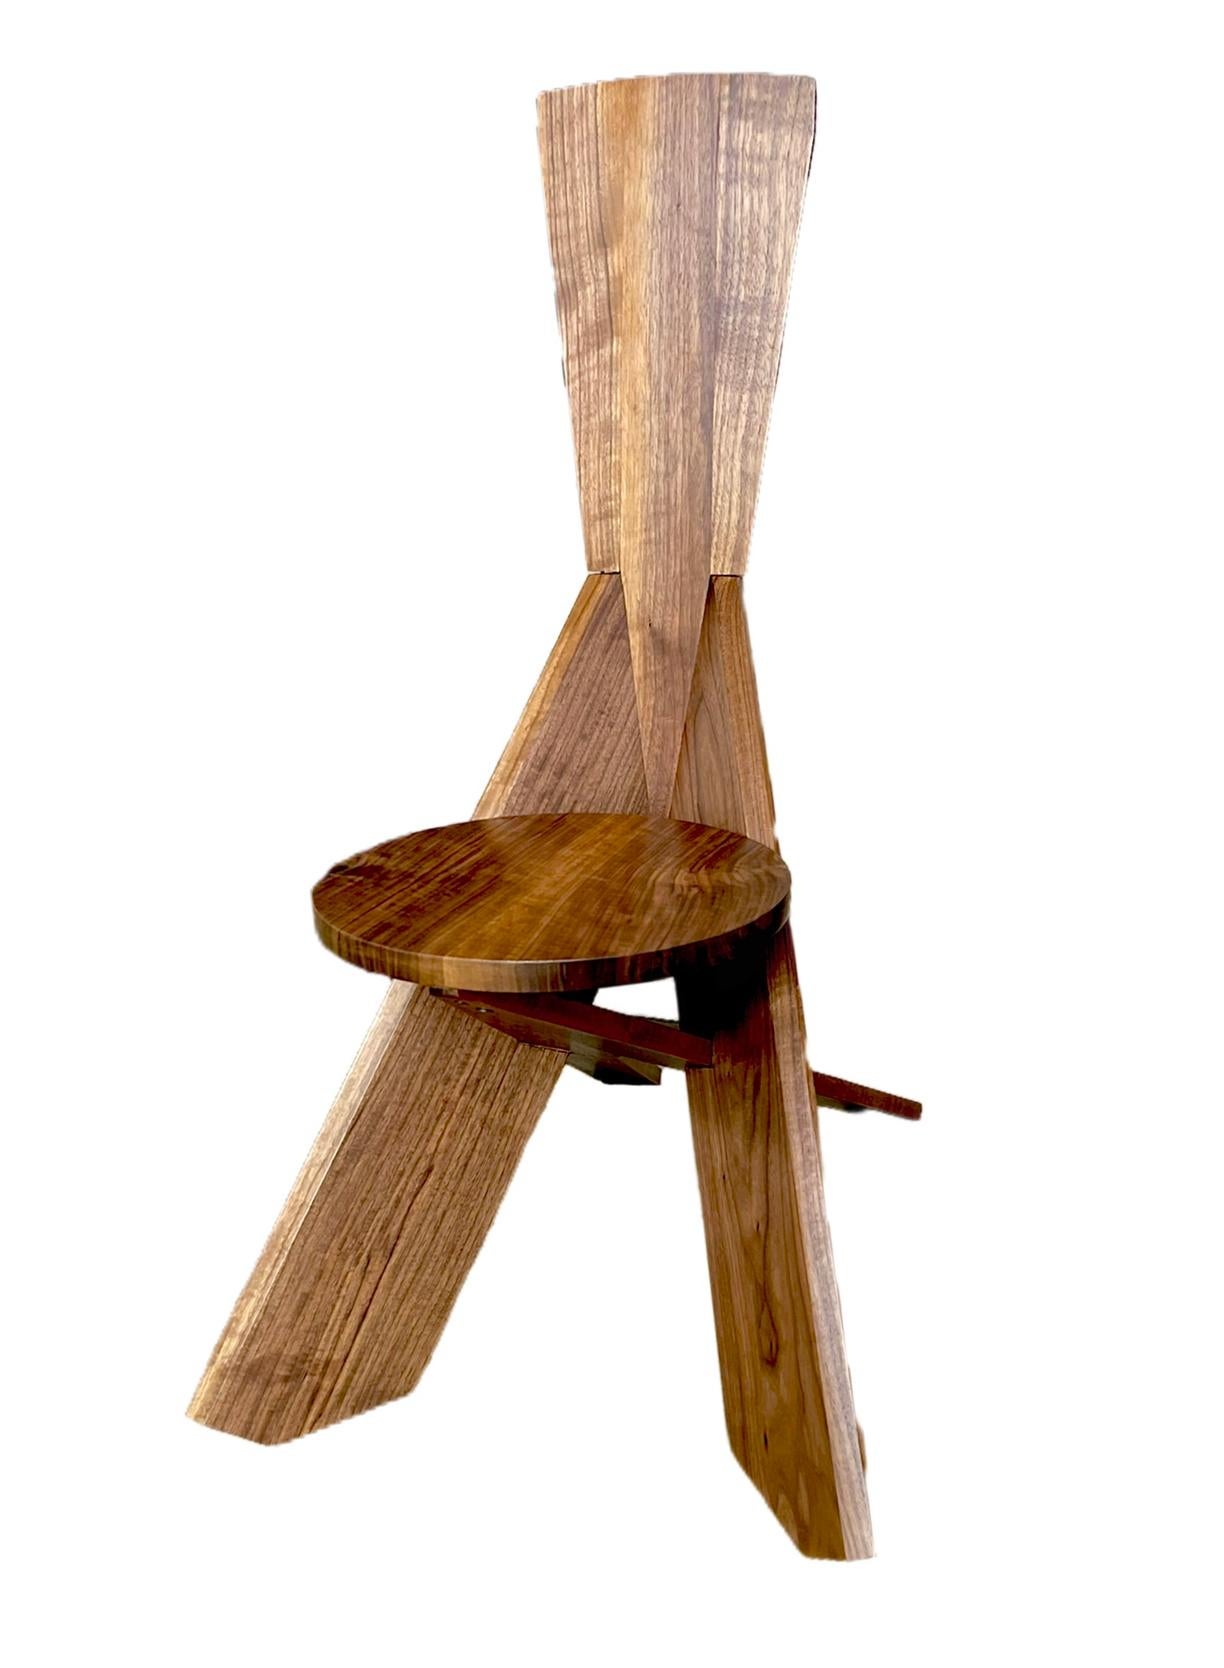 This is a one of a kind chair made by local Austin artist, Robert Wymer. 

It is made with an innovative design that is meant to get tighter and more sturdy the more it is used. It is a beautiful handcrafted, one-of-kind chair. It makes a great